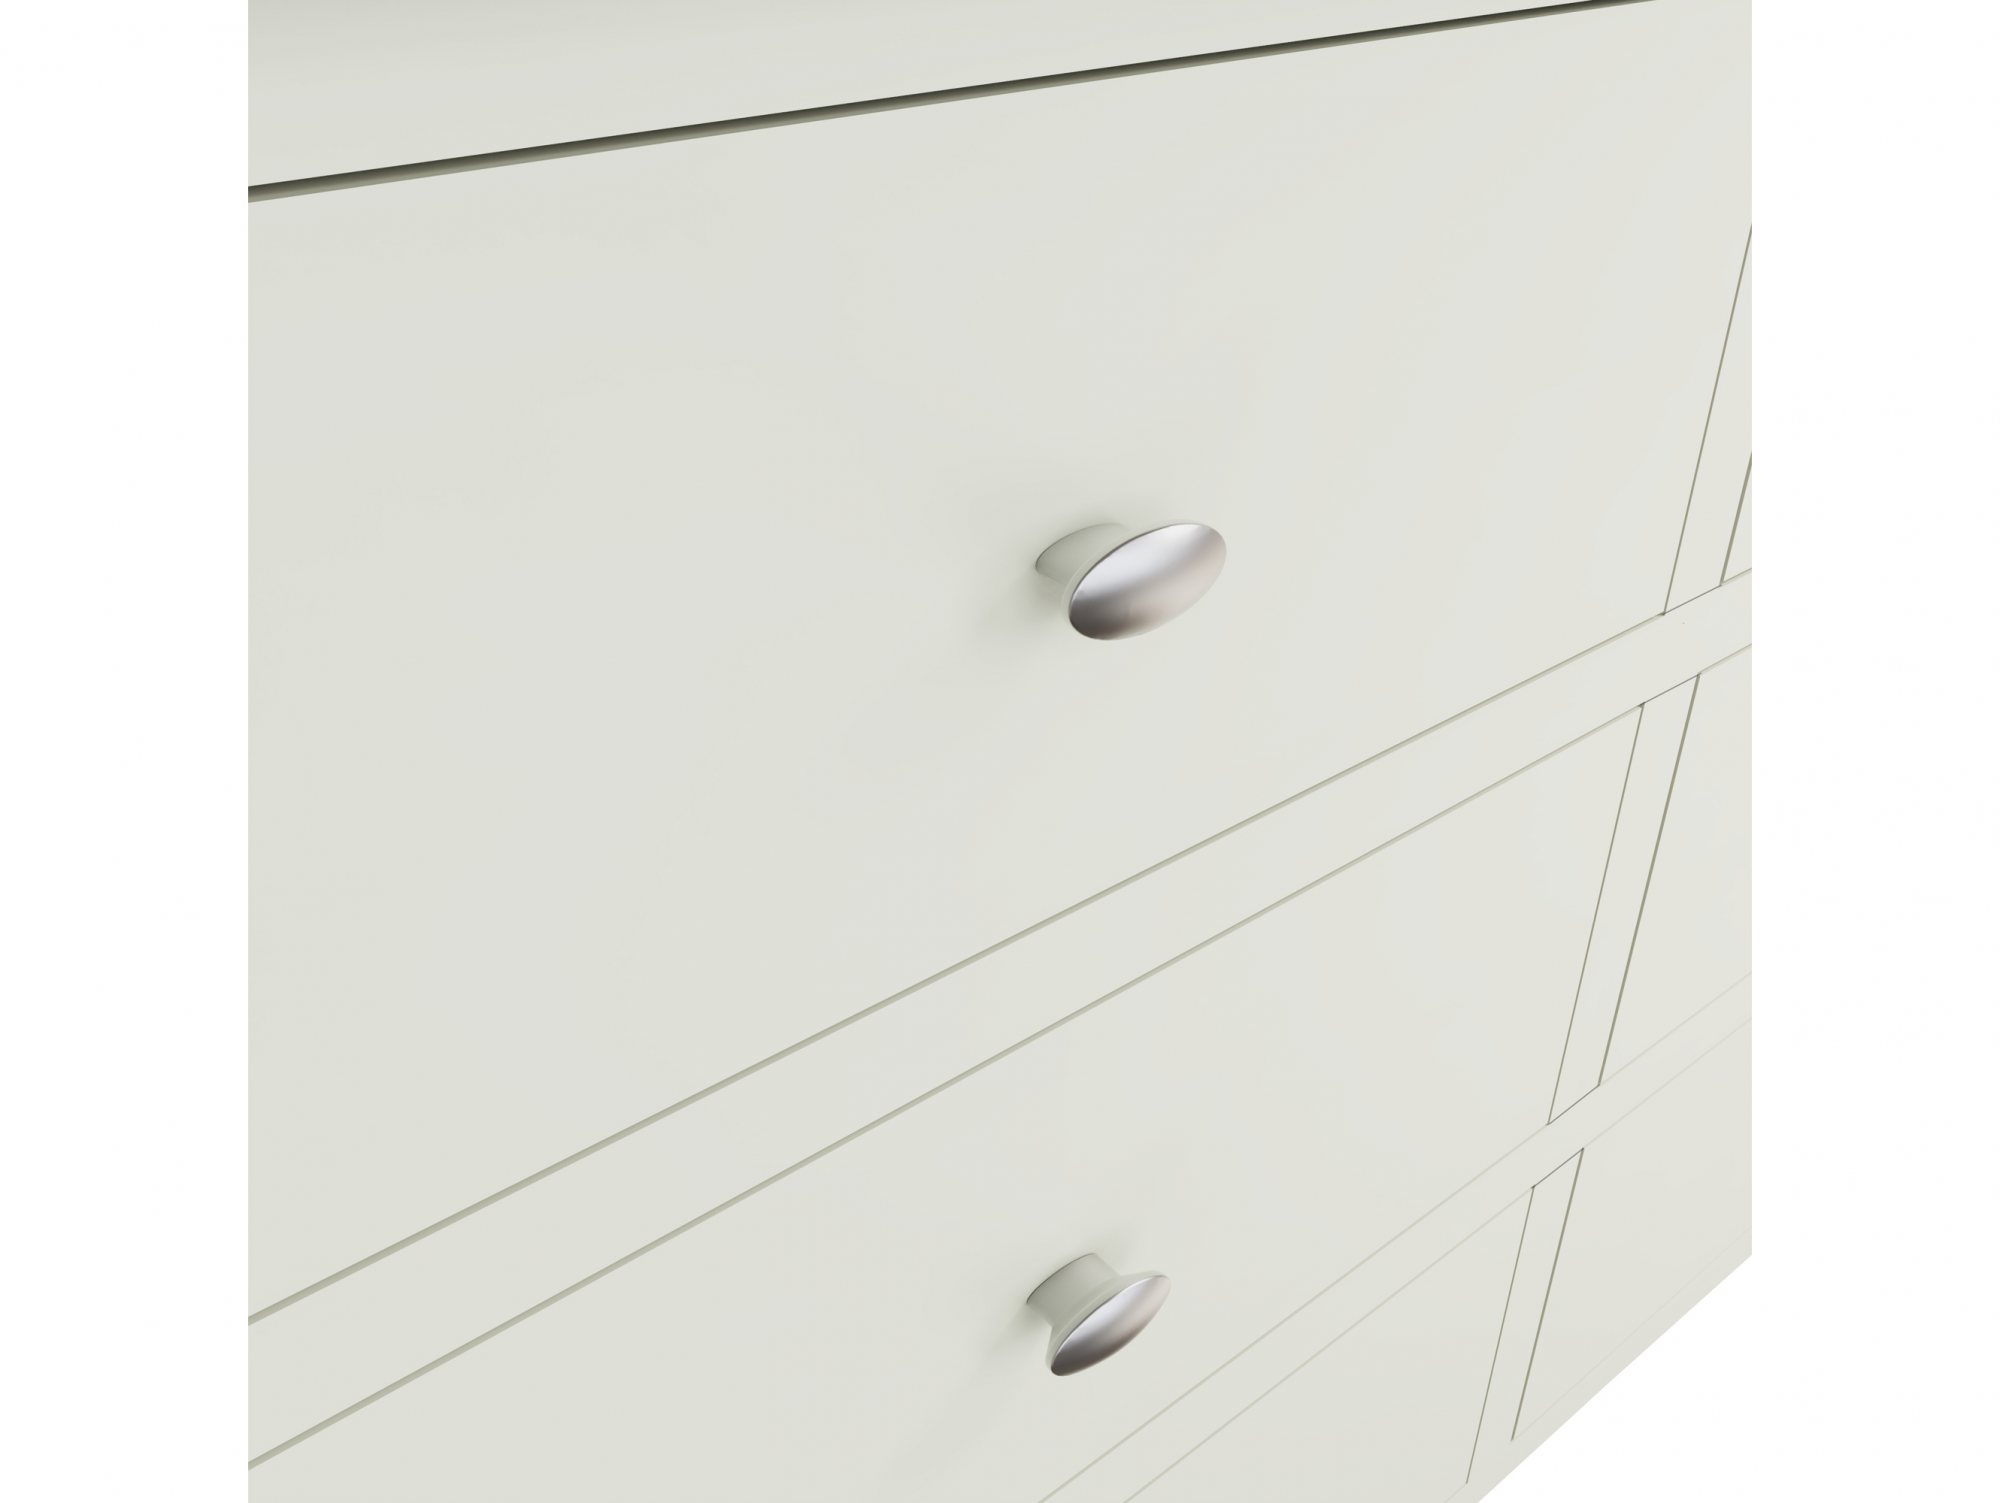 Kenmore Kenmore Patterdale White and Oak 6 Drawer Chest of Drawers (Assembled)